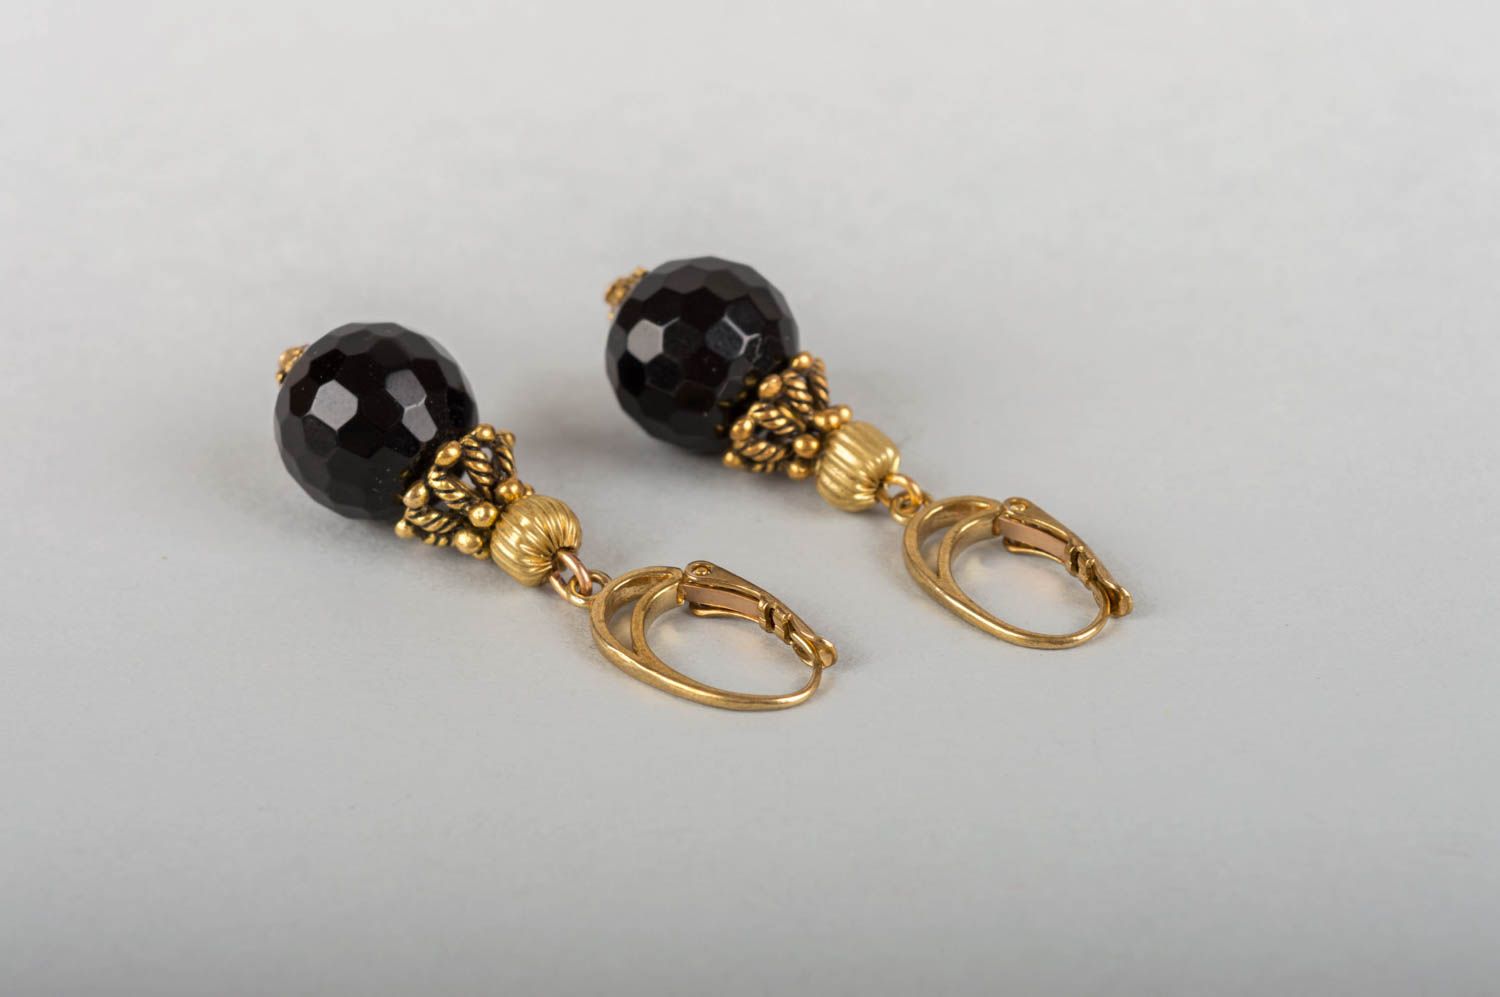 Handmade stylish earrings made of natural stone agate and brass fittings photo 4